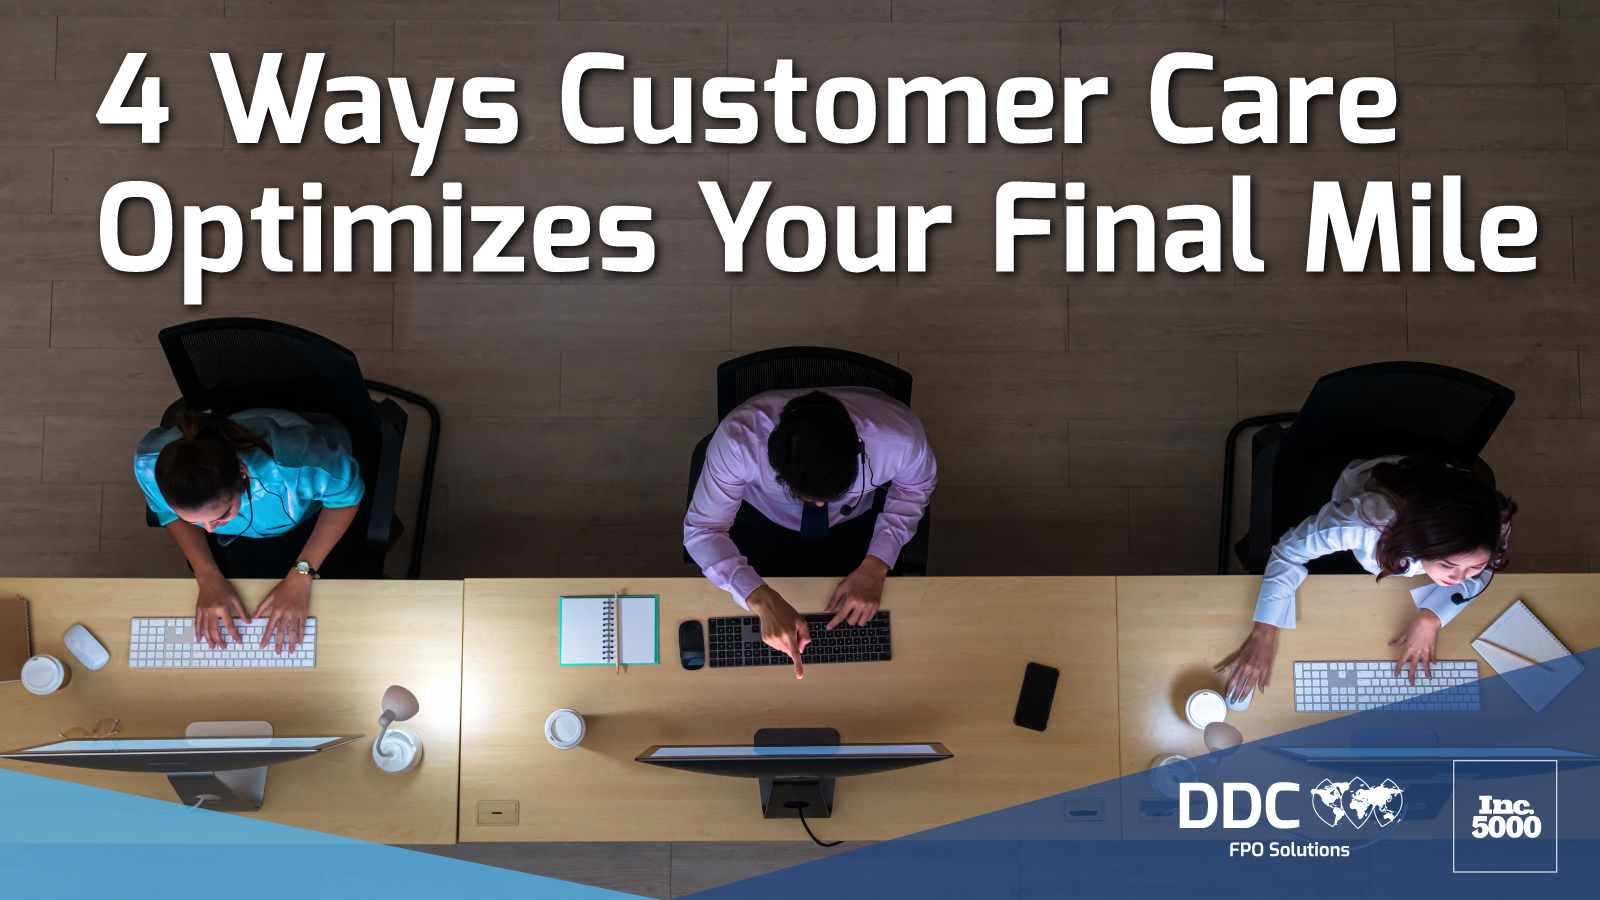 4 Ways Customer Care Optimizes Your Final Mile